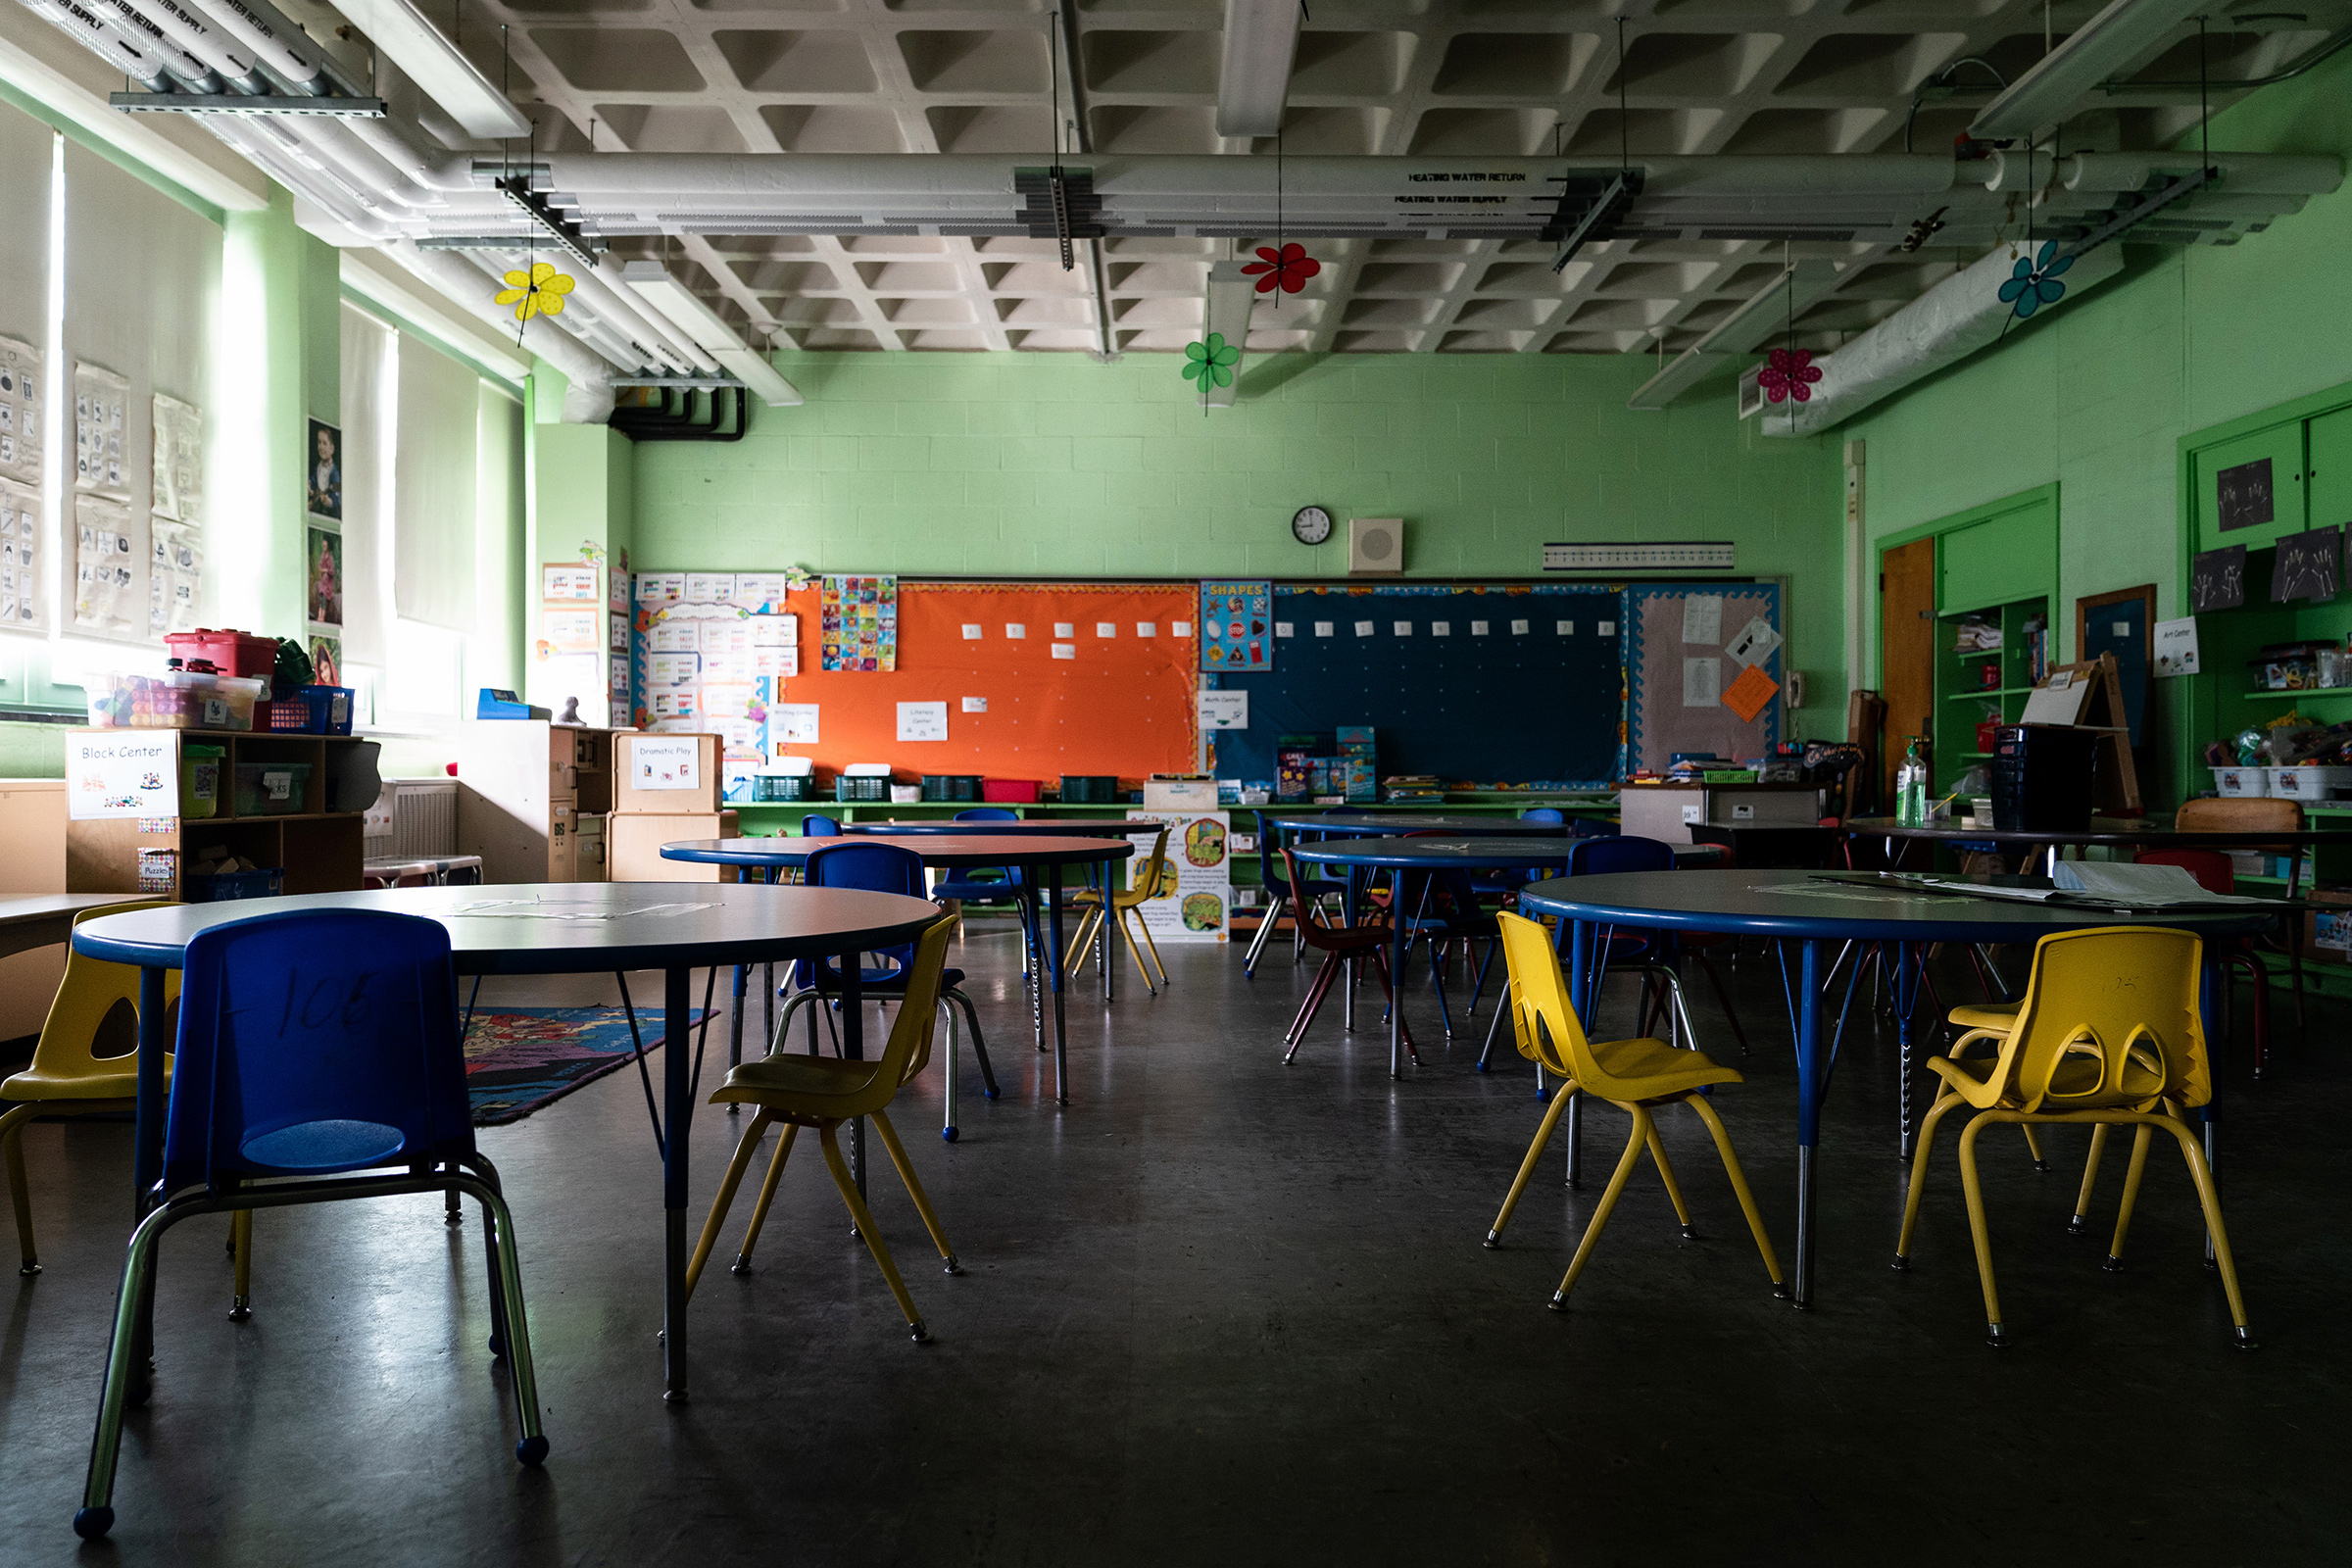 An empty classroom at Sinclair Lane Elementary School in Baltimore (Erin Schaff—The New York Times/Redux)